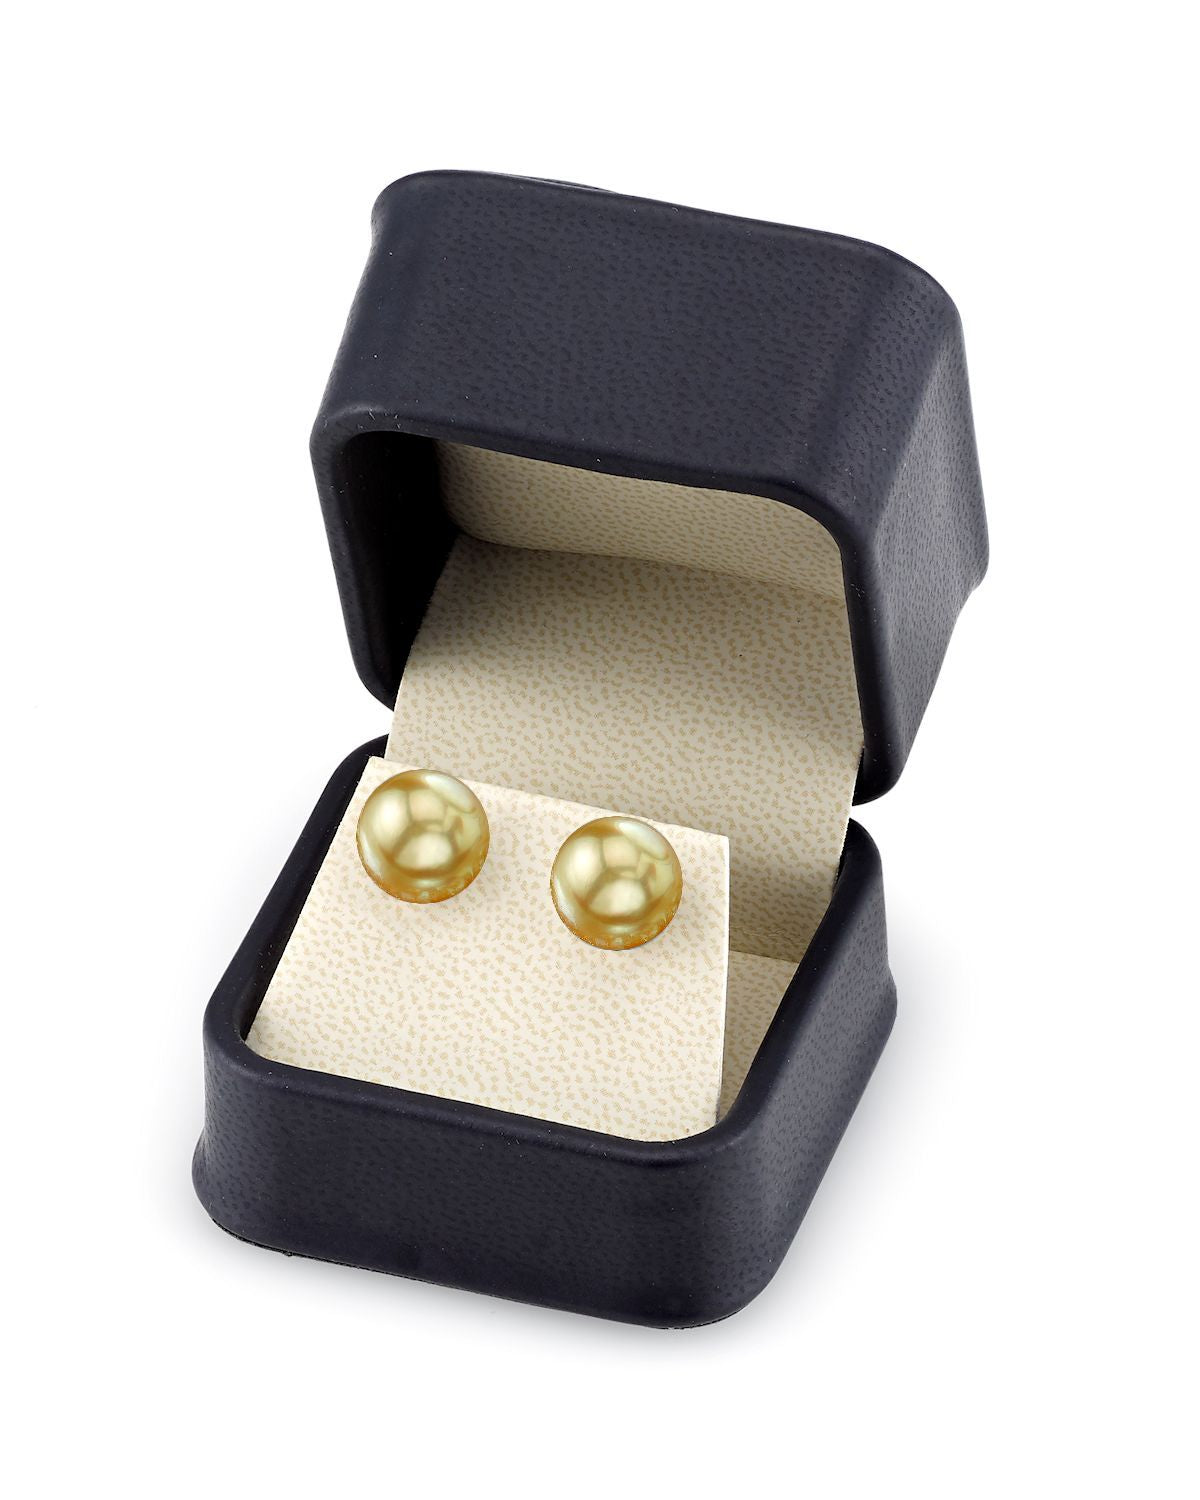 11mm Golden South Sea Round Pearl Stud Earrings- Choose Your Quality - Secondary Image